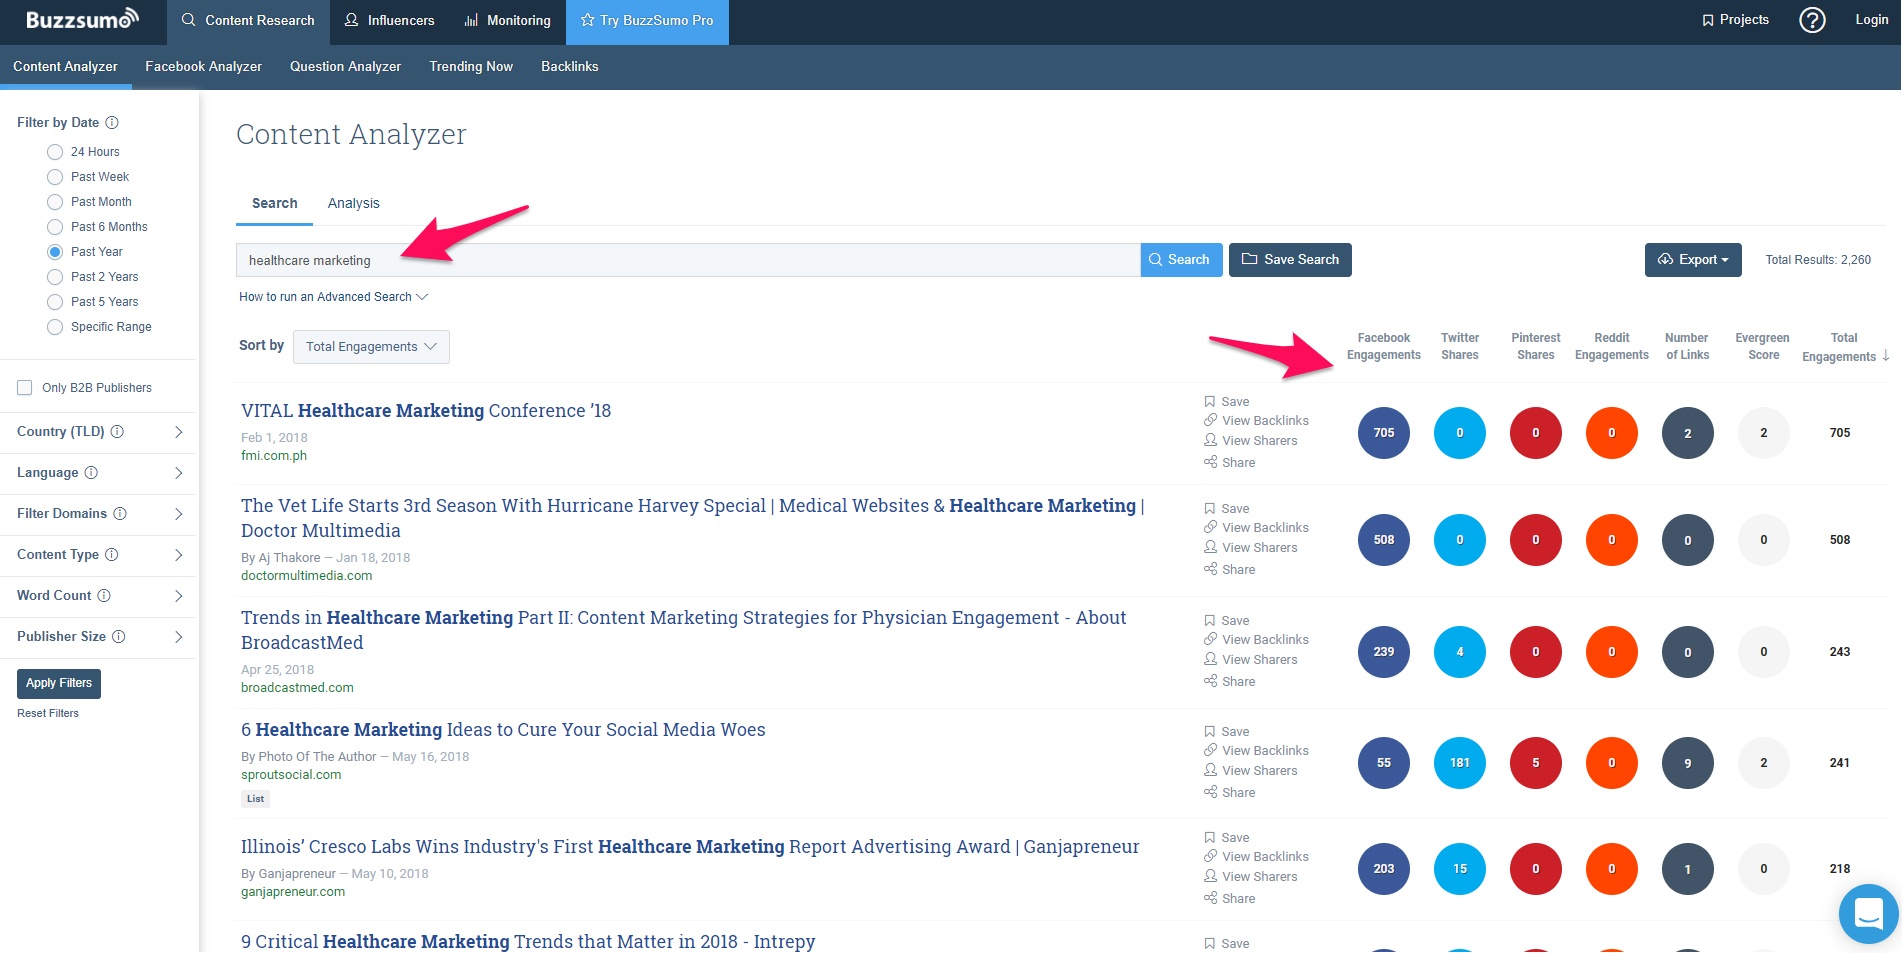 Using BuzzSumo to find content ideas